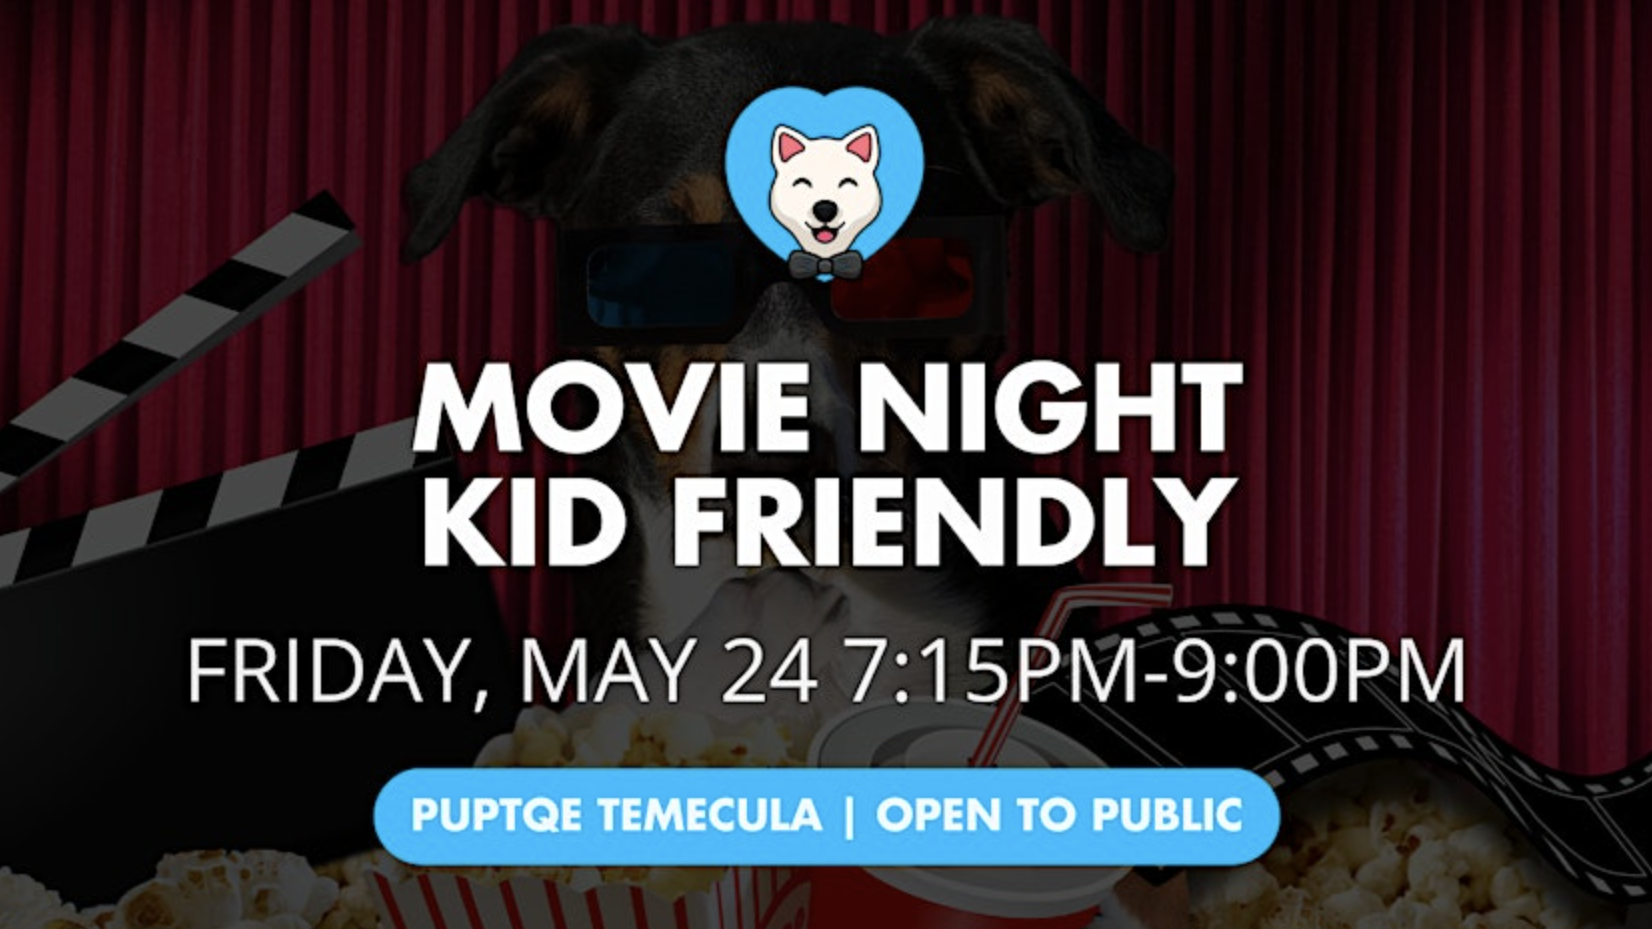 **Movie Night: Kid Friendly & Dog Friendly**

**When:** Friday, May 24, 7:15 PM - 9:00 PM  
**Where:** Puptqe Temecula  
**Details:** Open to the Public 

A dog wearing 3D glasses and holding popcorn is featured on the poster.